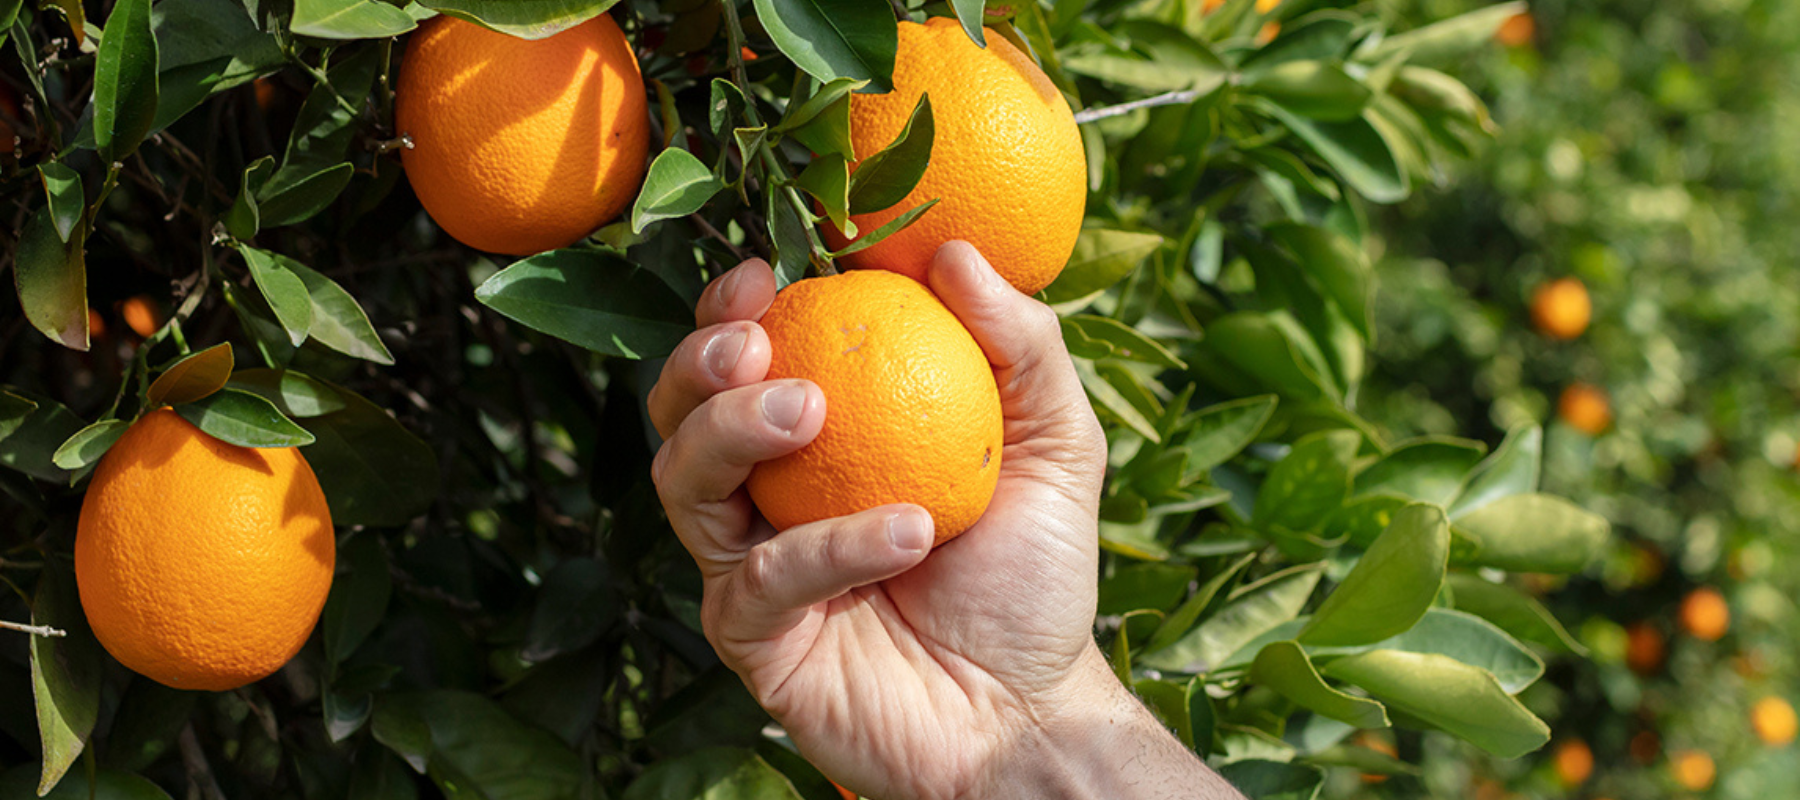 Top tips for preparing your citrus trees for winter